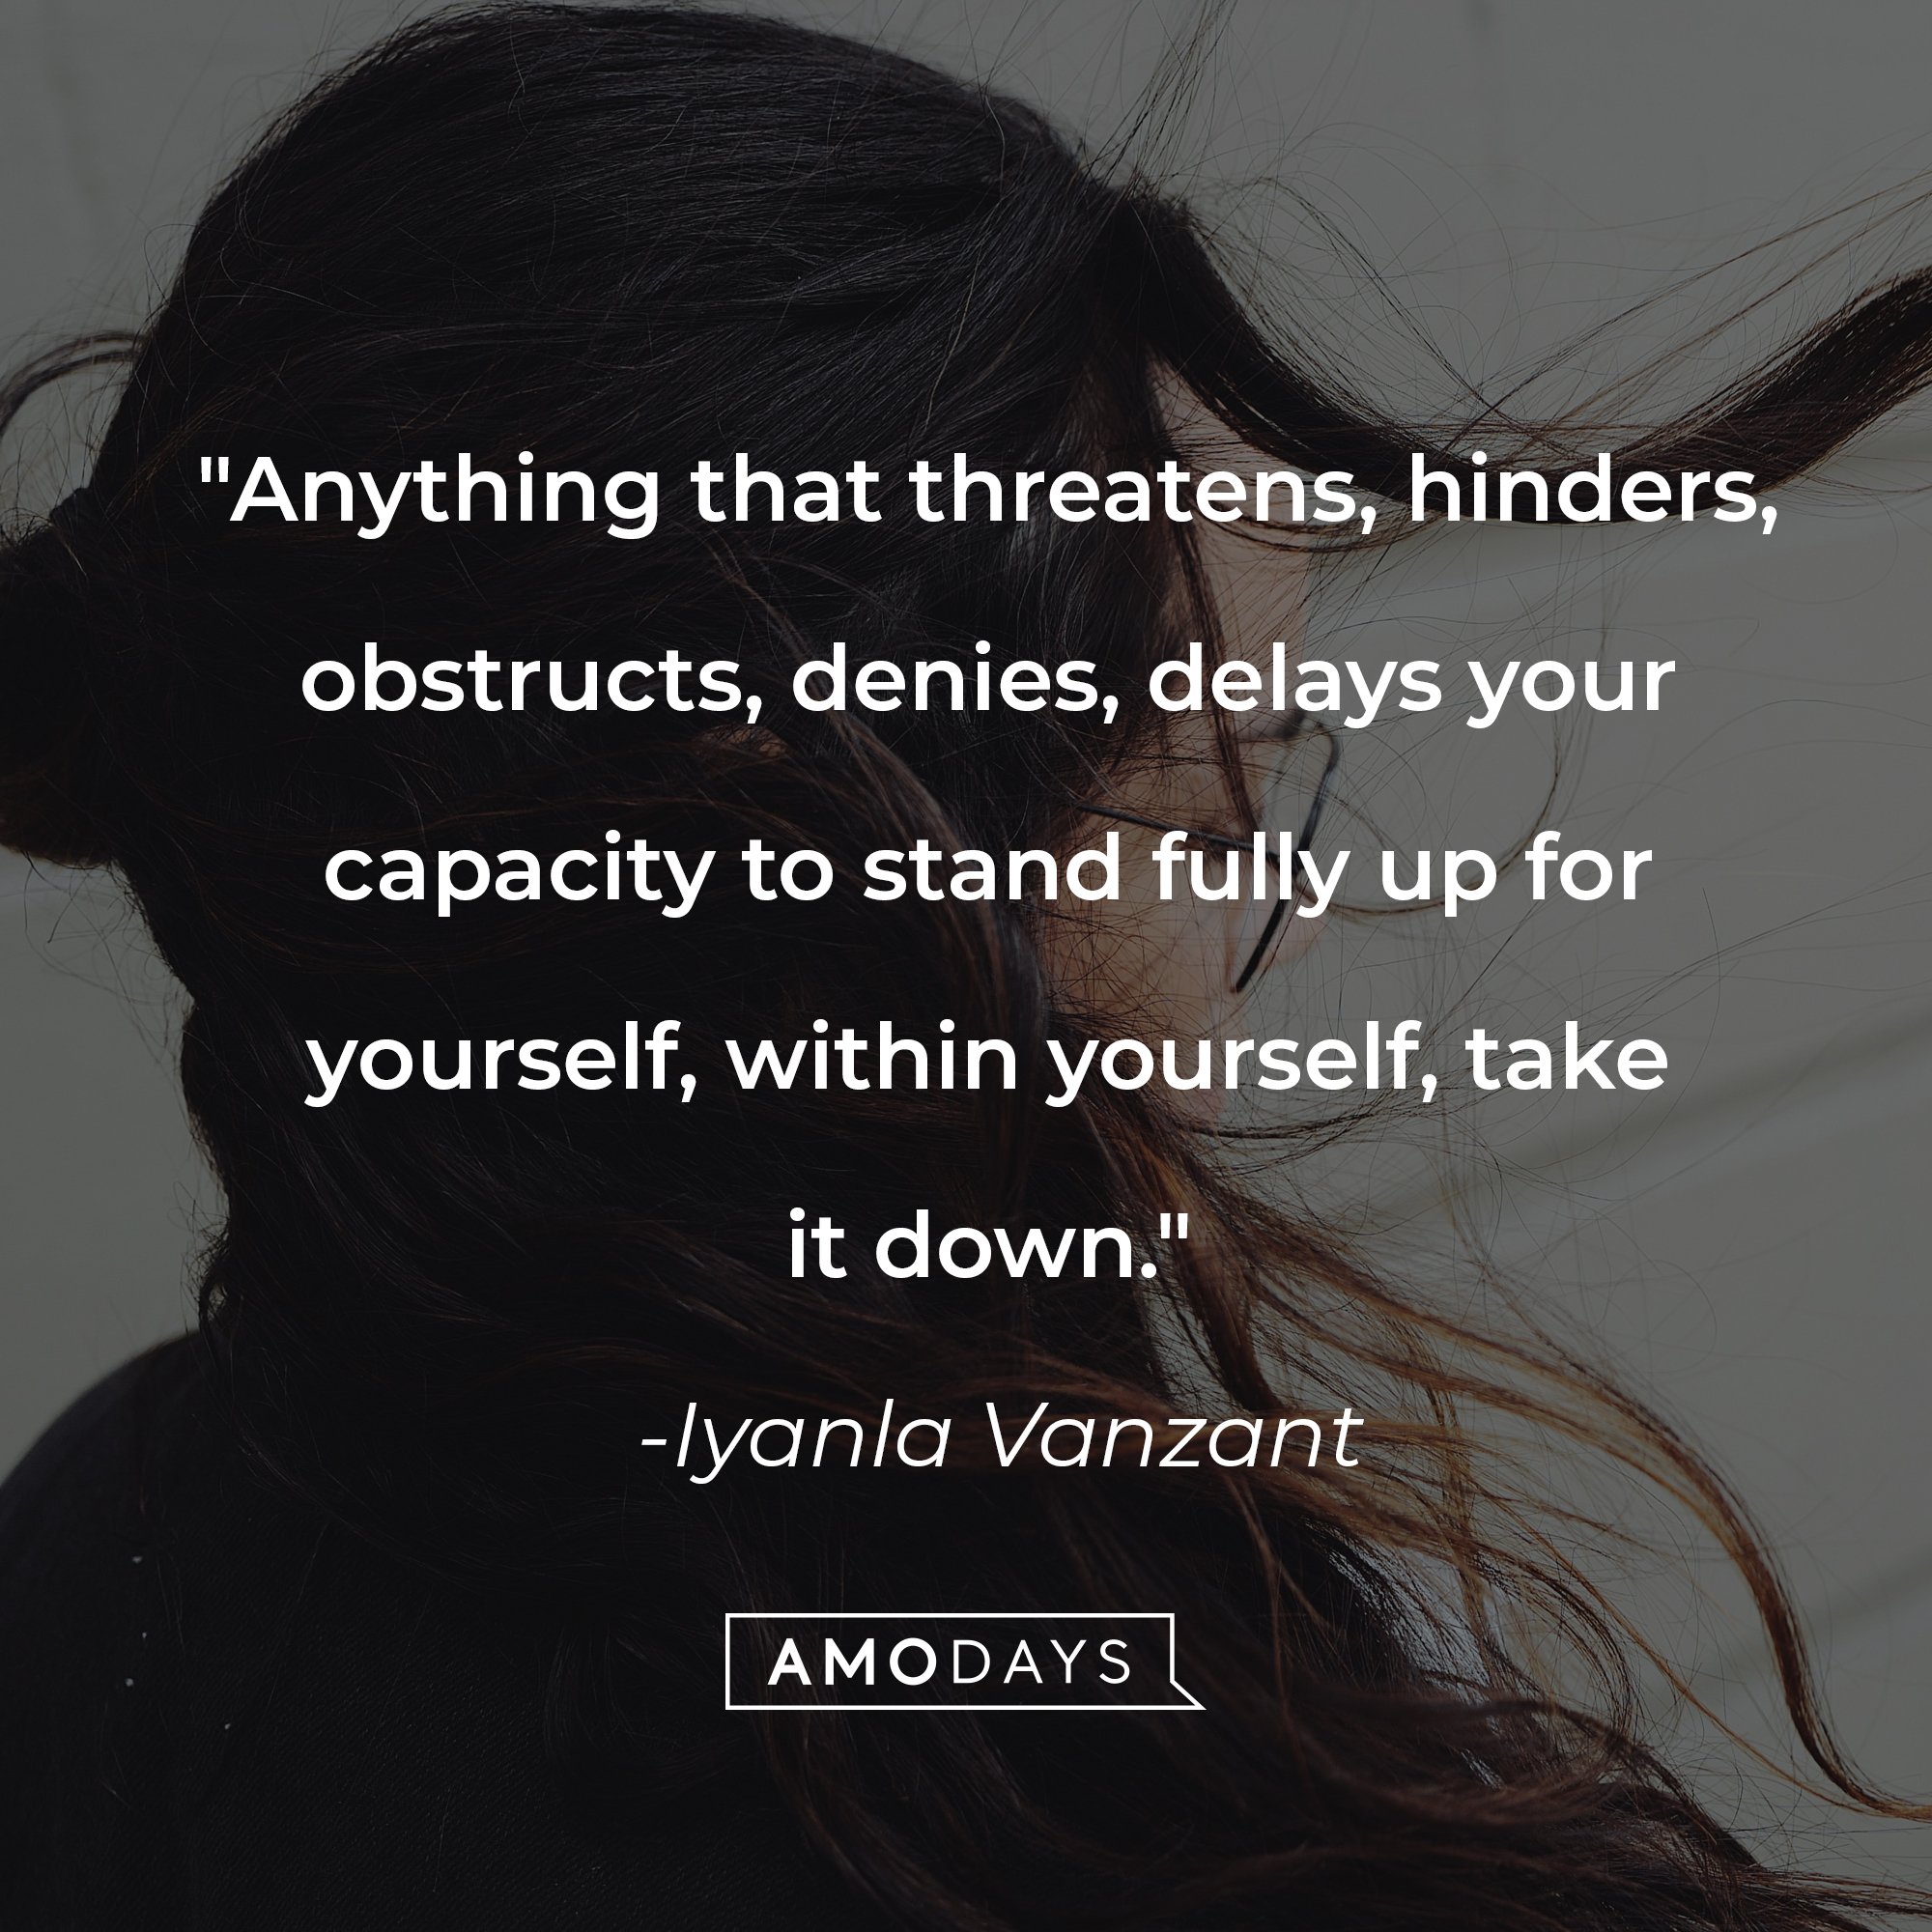 Iyanla Vanzant's quote: "Anything that threatens, hinders, obstructs, denies, delays your capacity to stand fully up for yourself, within yourself, take it down." | Image: AmoDays